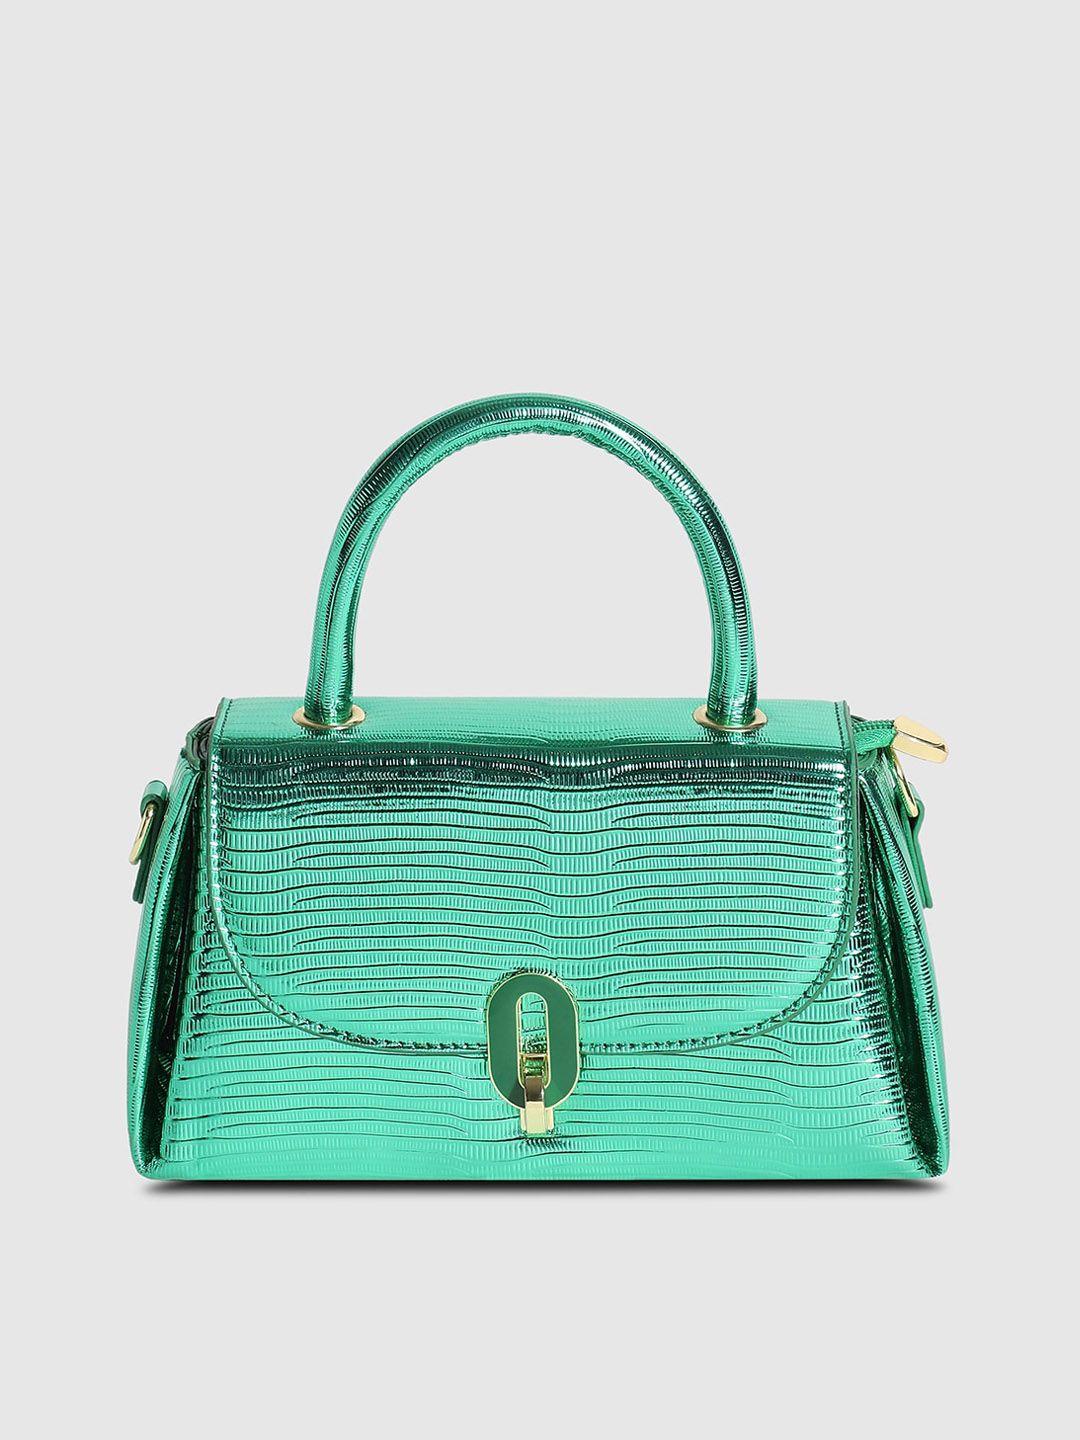 haute sauce by campus sutra green structured handheld bag